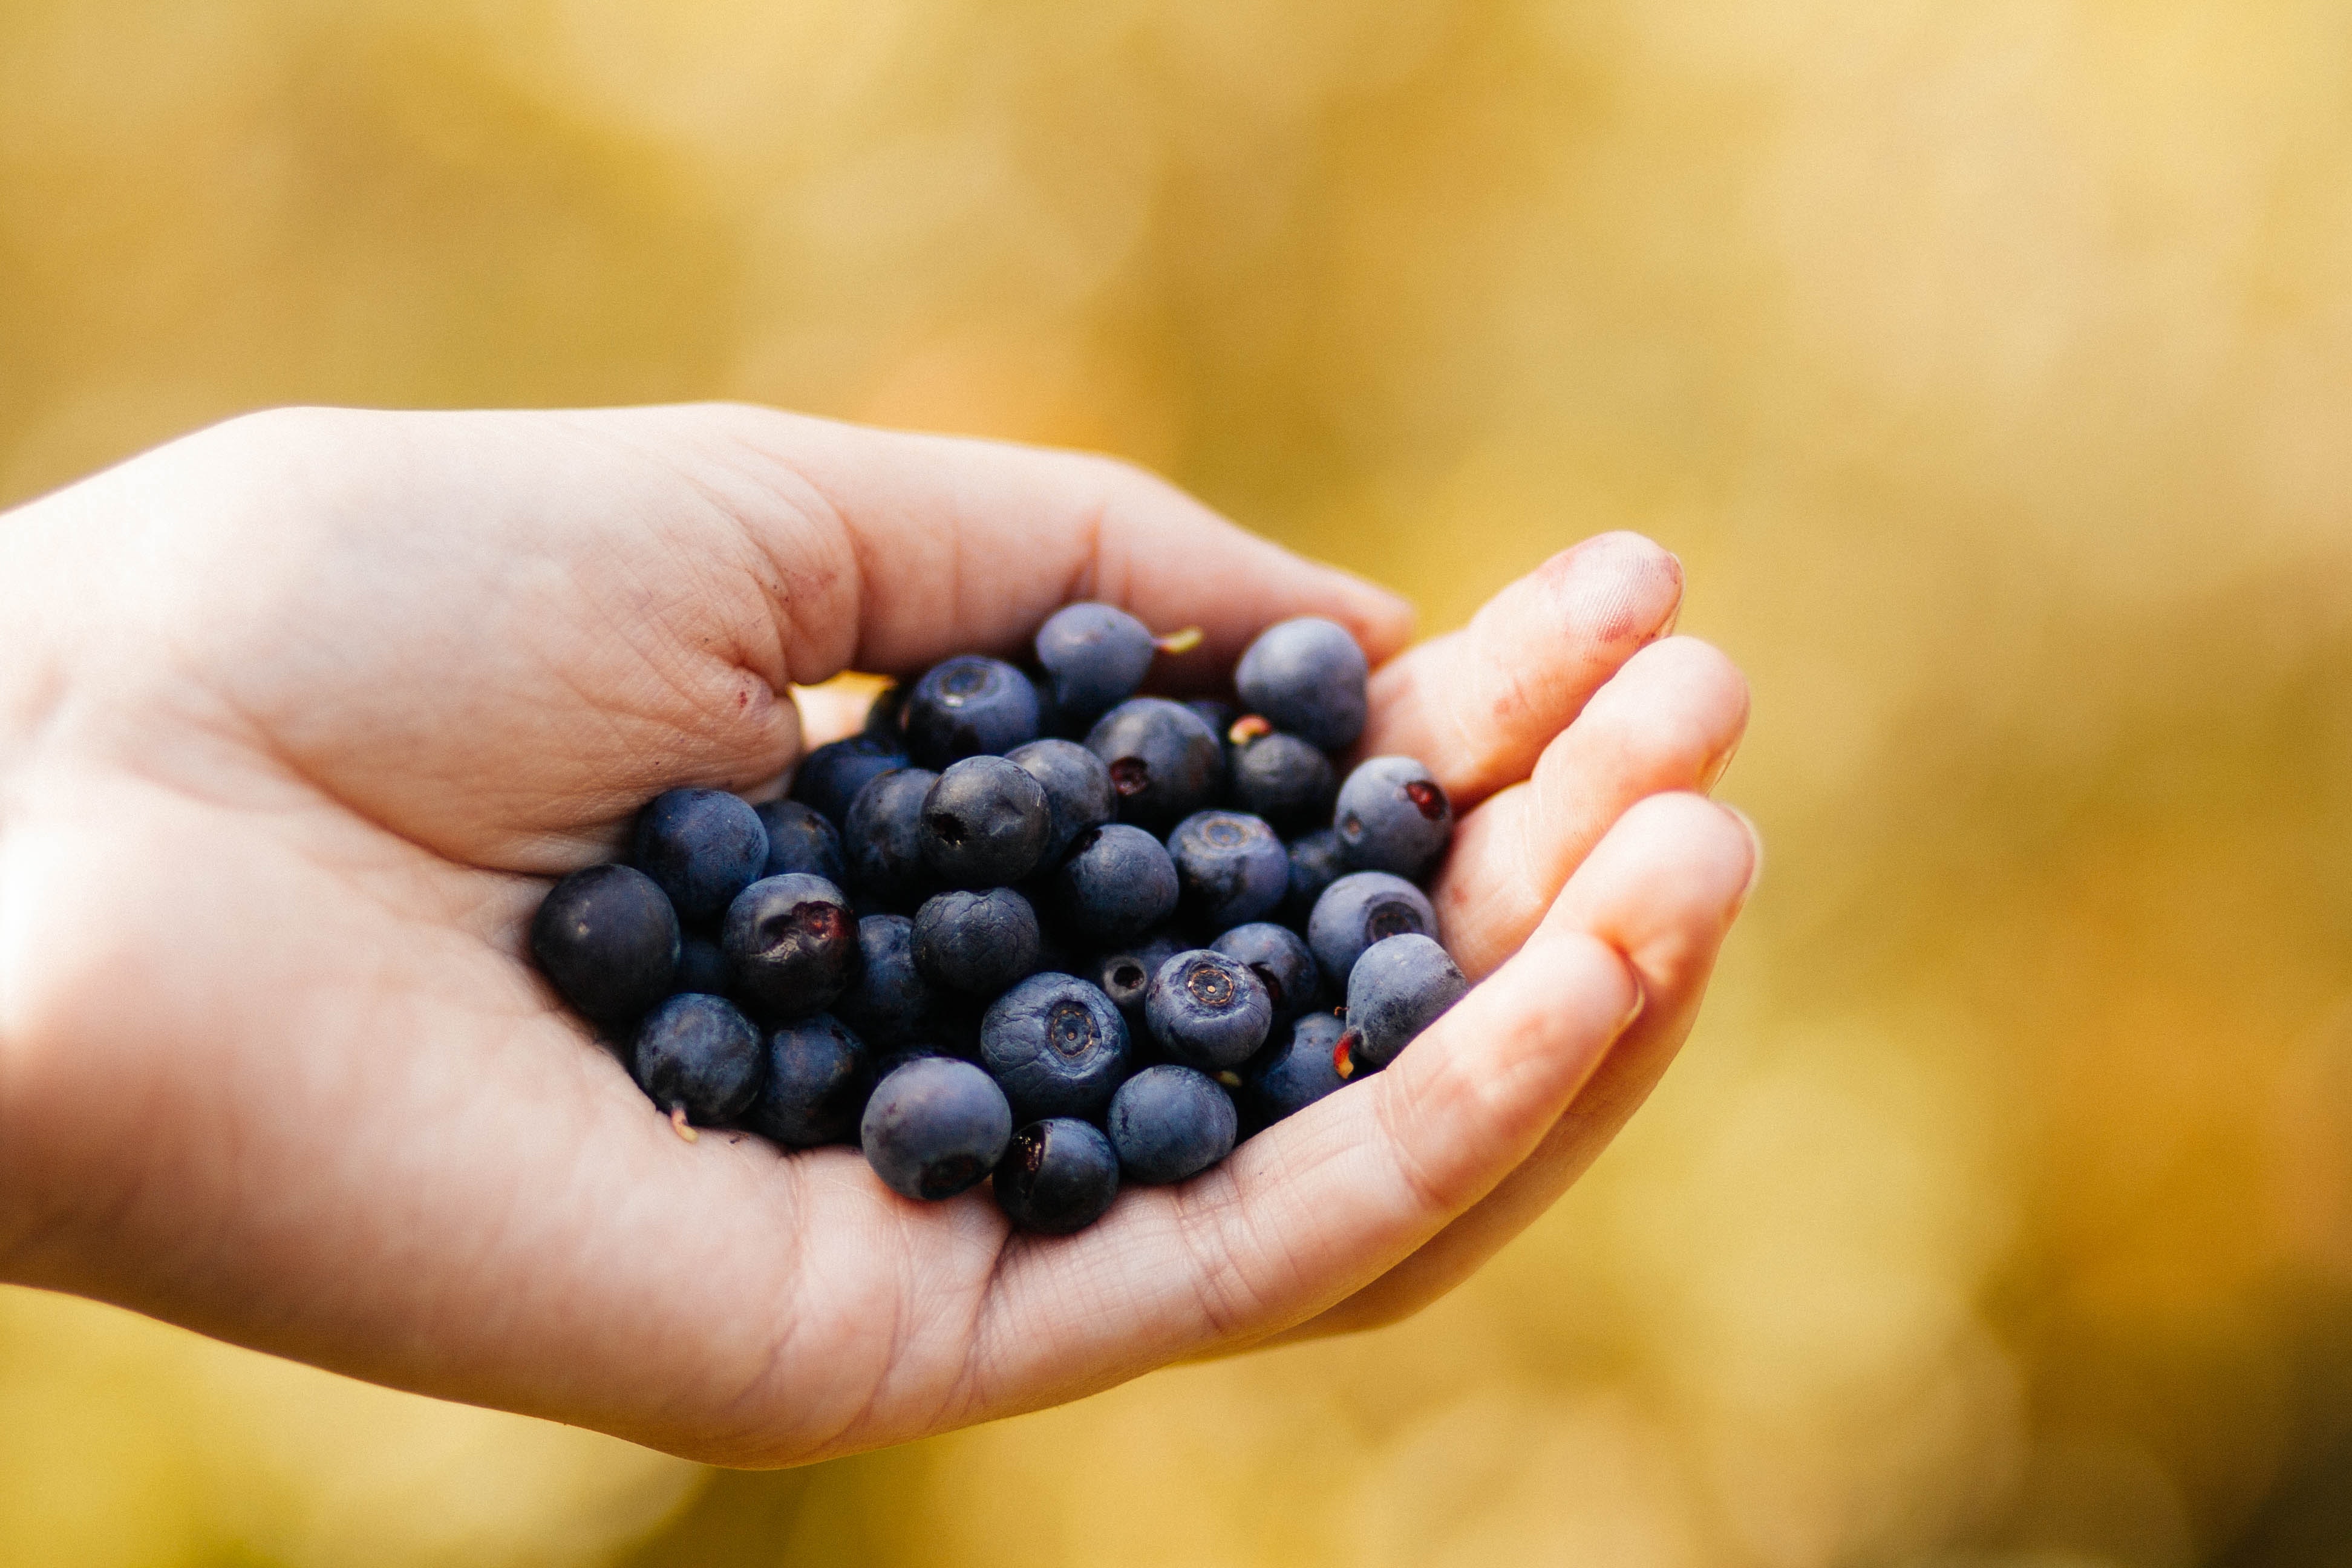 Selective Focus Photography of Blueberry on Human Hand, Berry, Grow, Round, Outdoors, HQ Photo